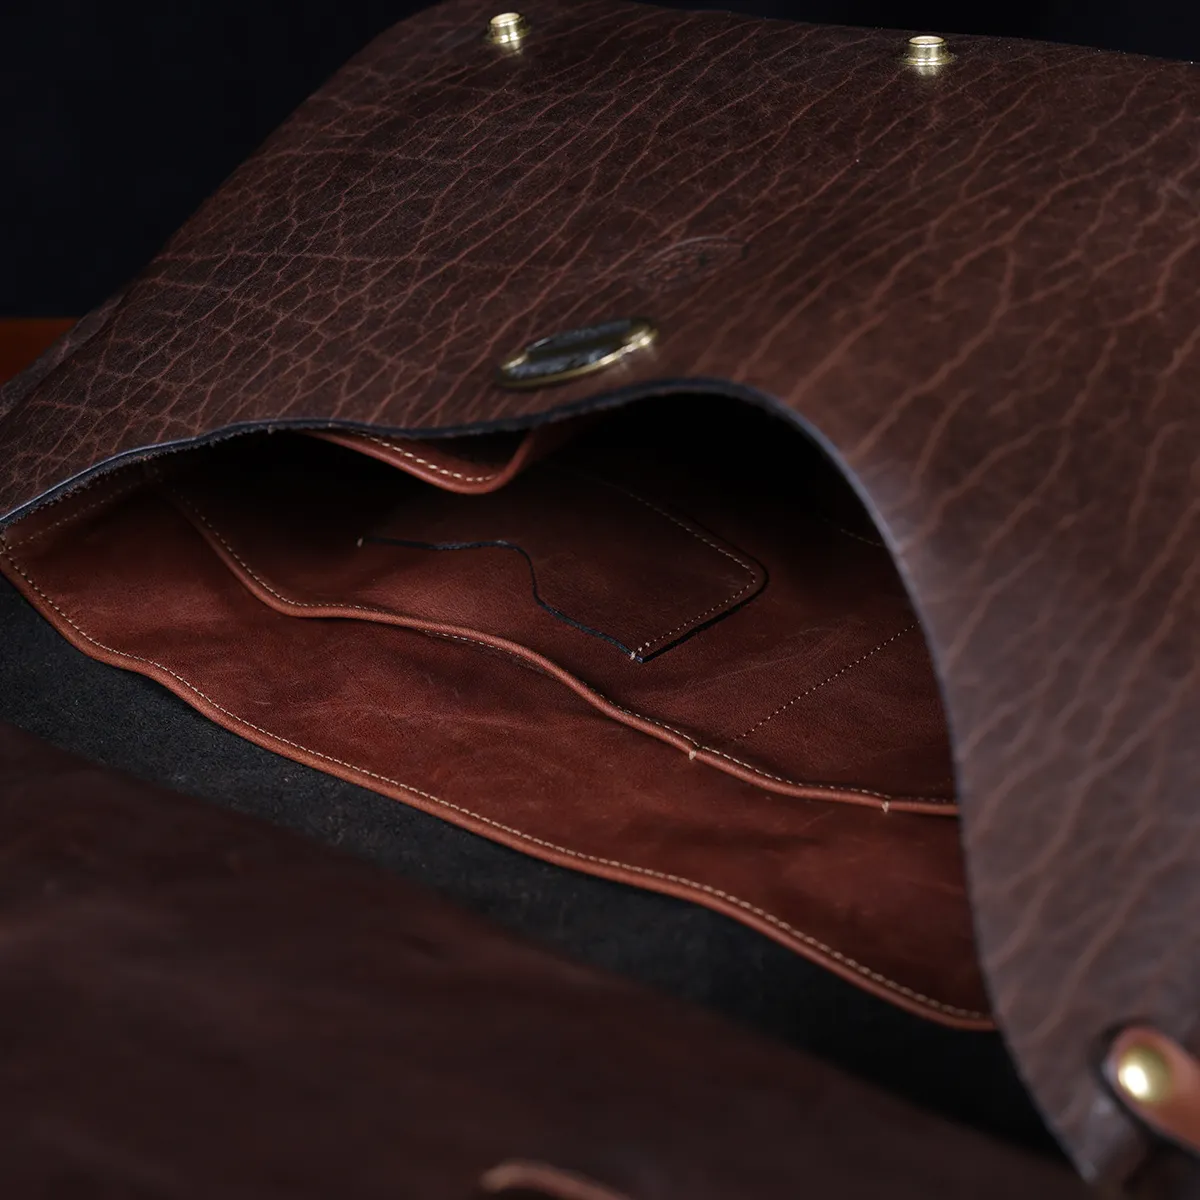 No. 1 Saddlebag Briefcase in dark Tobacco Brown American Buffalo trimmed with Alligator - serial number 004 - inside view